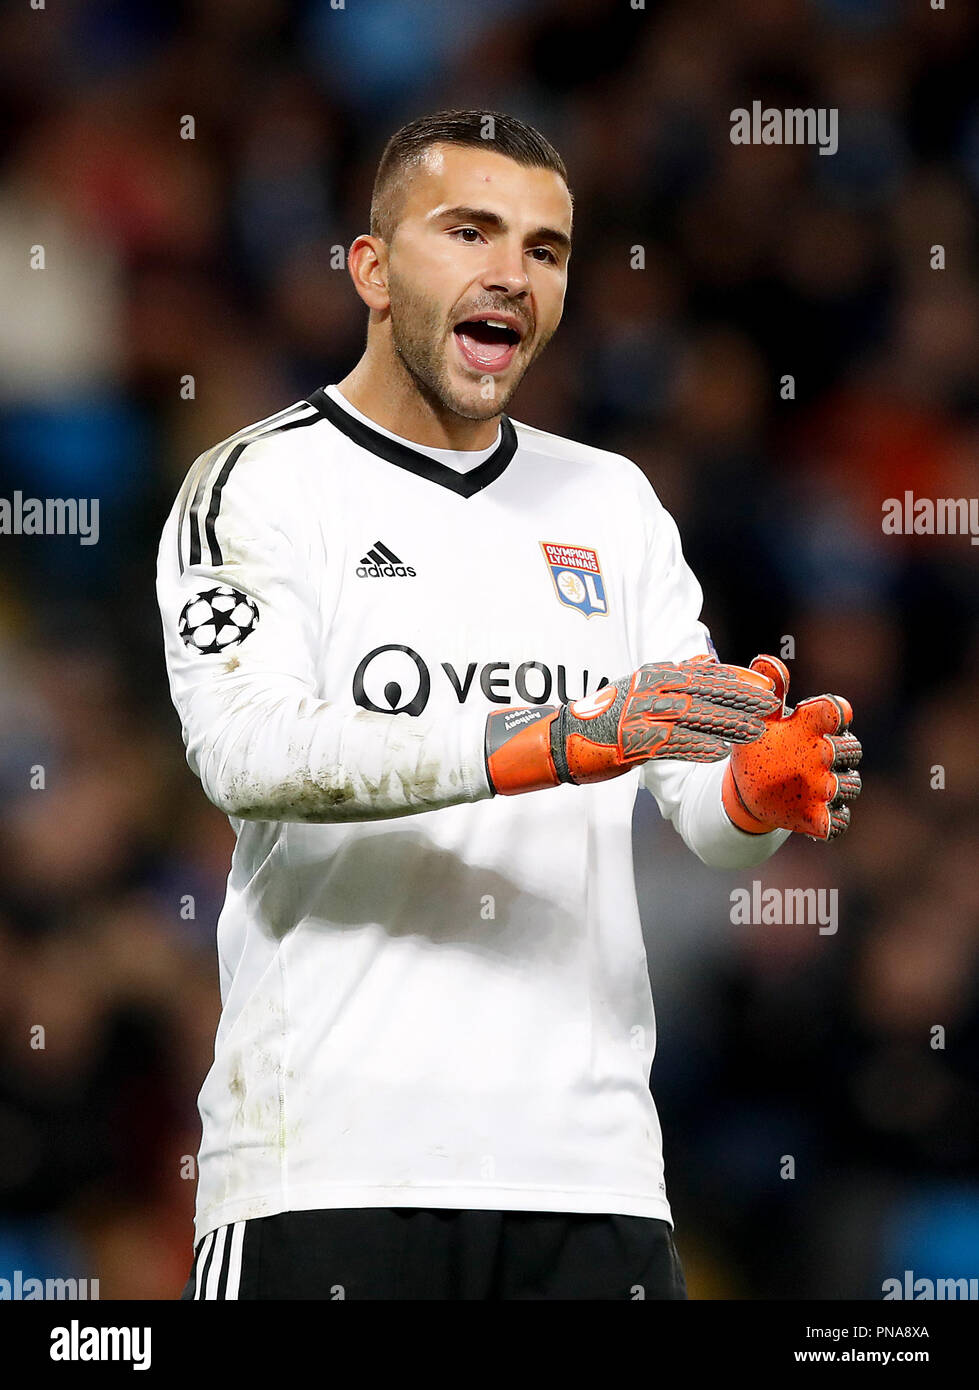 Lyon's Anthony Lopes during the UEFA Champions League, Group F match at the Etihad Stadium, Manchester. PRESS ASSOCIATION Photo. Picture date: Wednesday September 19, 2018. See PA story SOCCER Man City. Photo credit should read: Martin Rickett/PA Wire Stock Photo